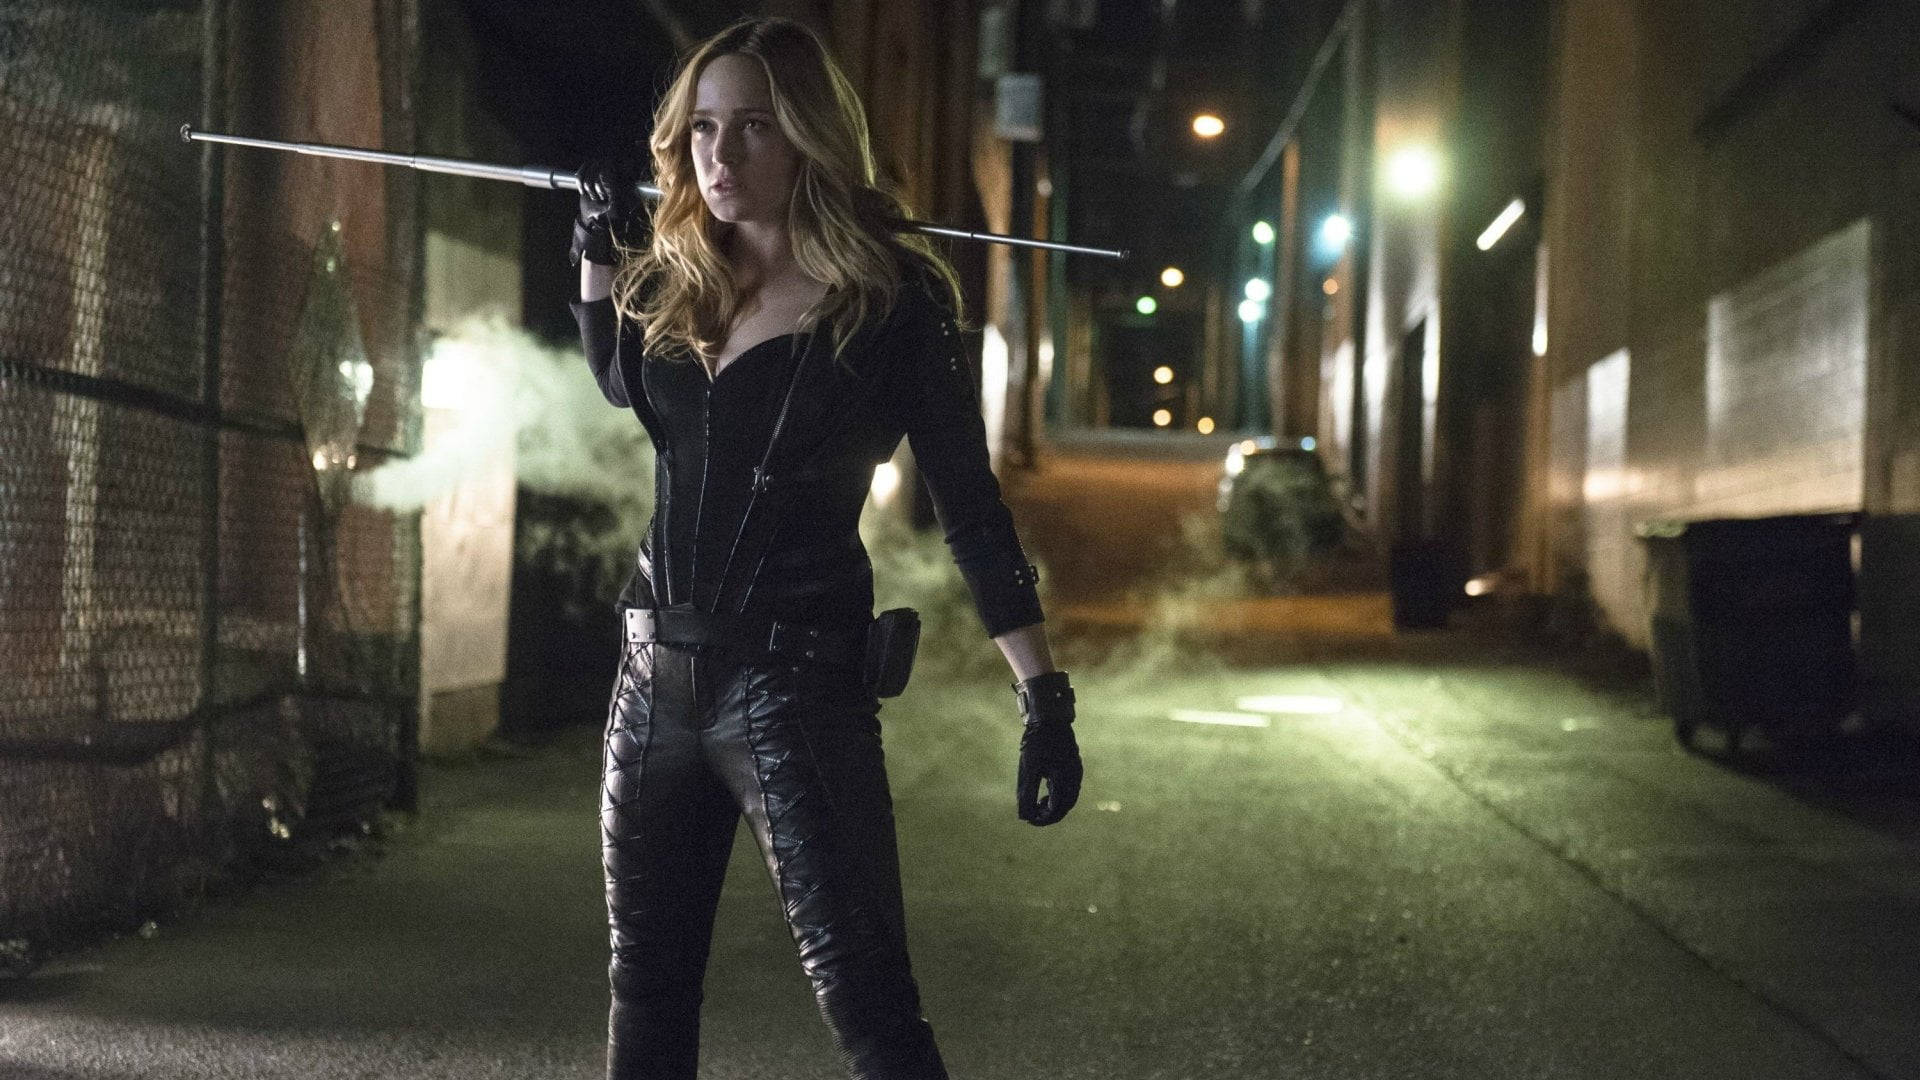 Black Canary Exhibiting Combat Skills with Silver Pole Wallpaper